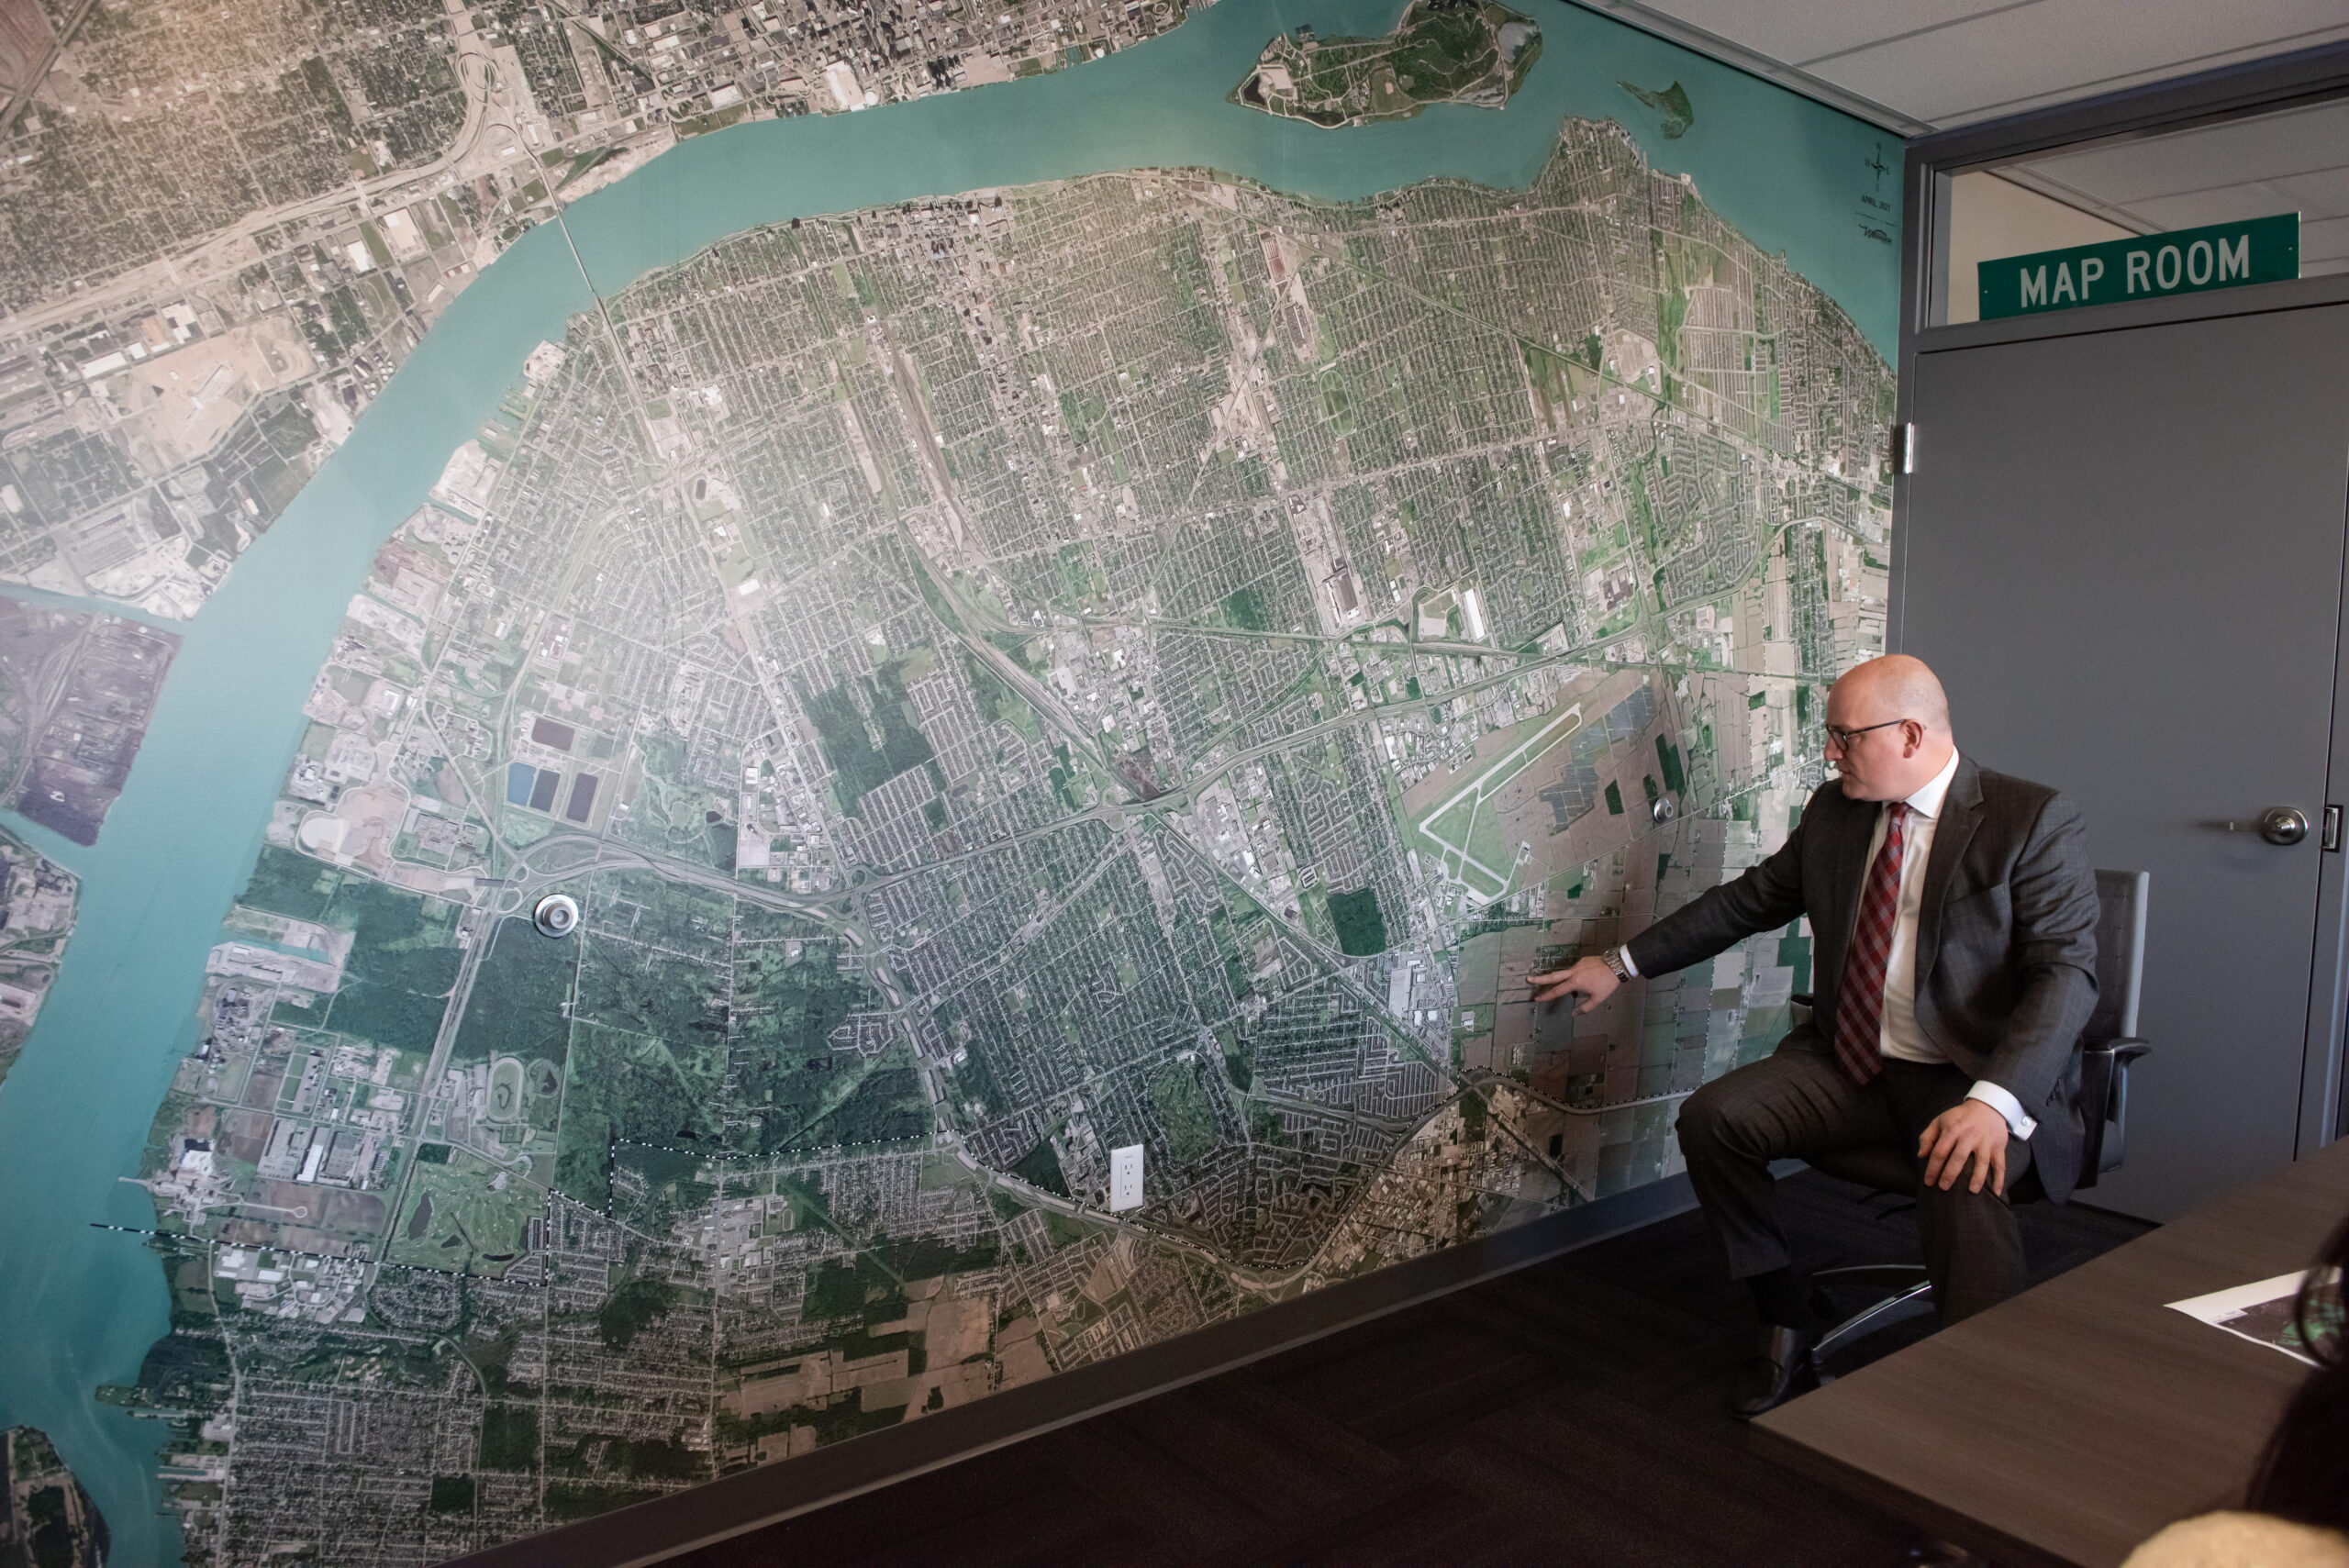 Windsor Mayor Drew Dilkens points at open farmland on a map in his office to indicate the site of future development